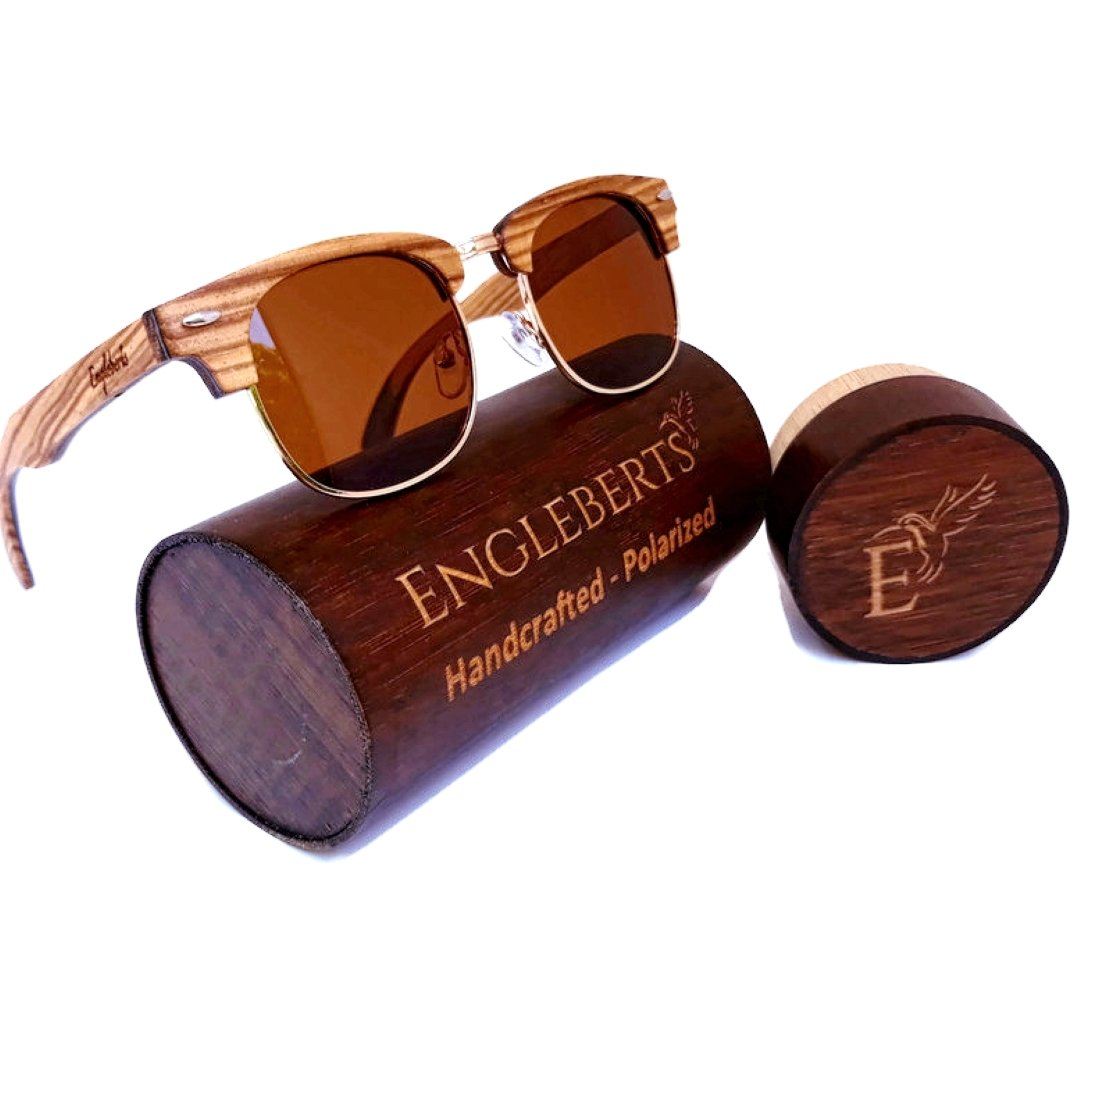 Real Ebony and ZebraWood Sunglasses With Bamboo Case, Tea Colored Sunglasses 